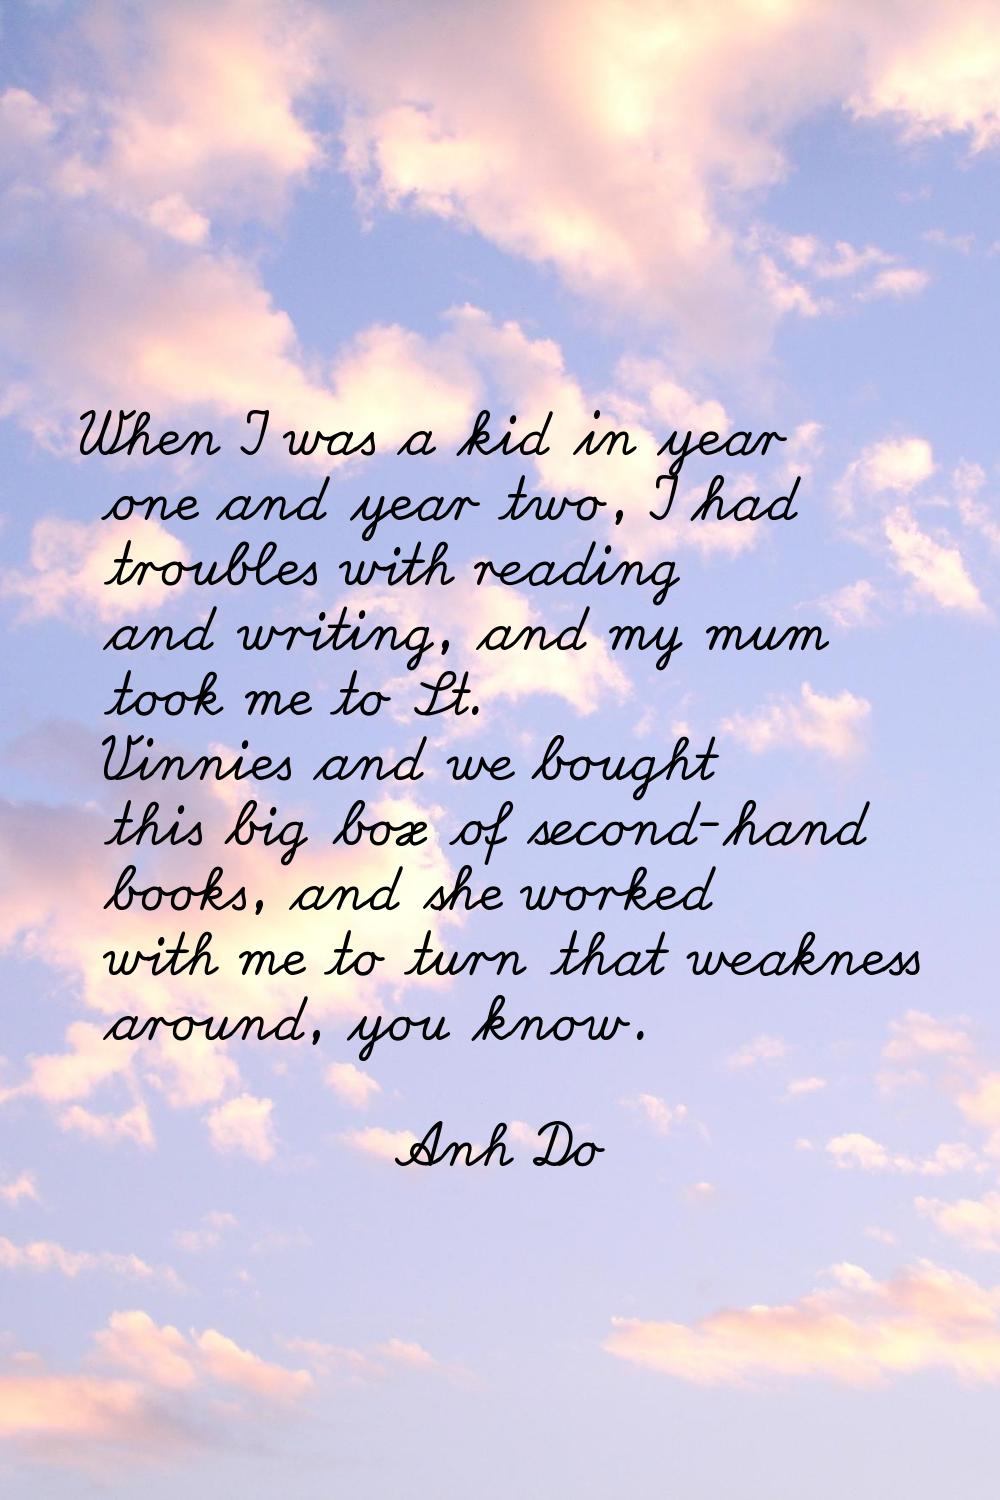 When I was a kid in year one and year two, I had troubles with reading and writing, and my mum took